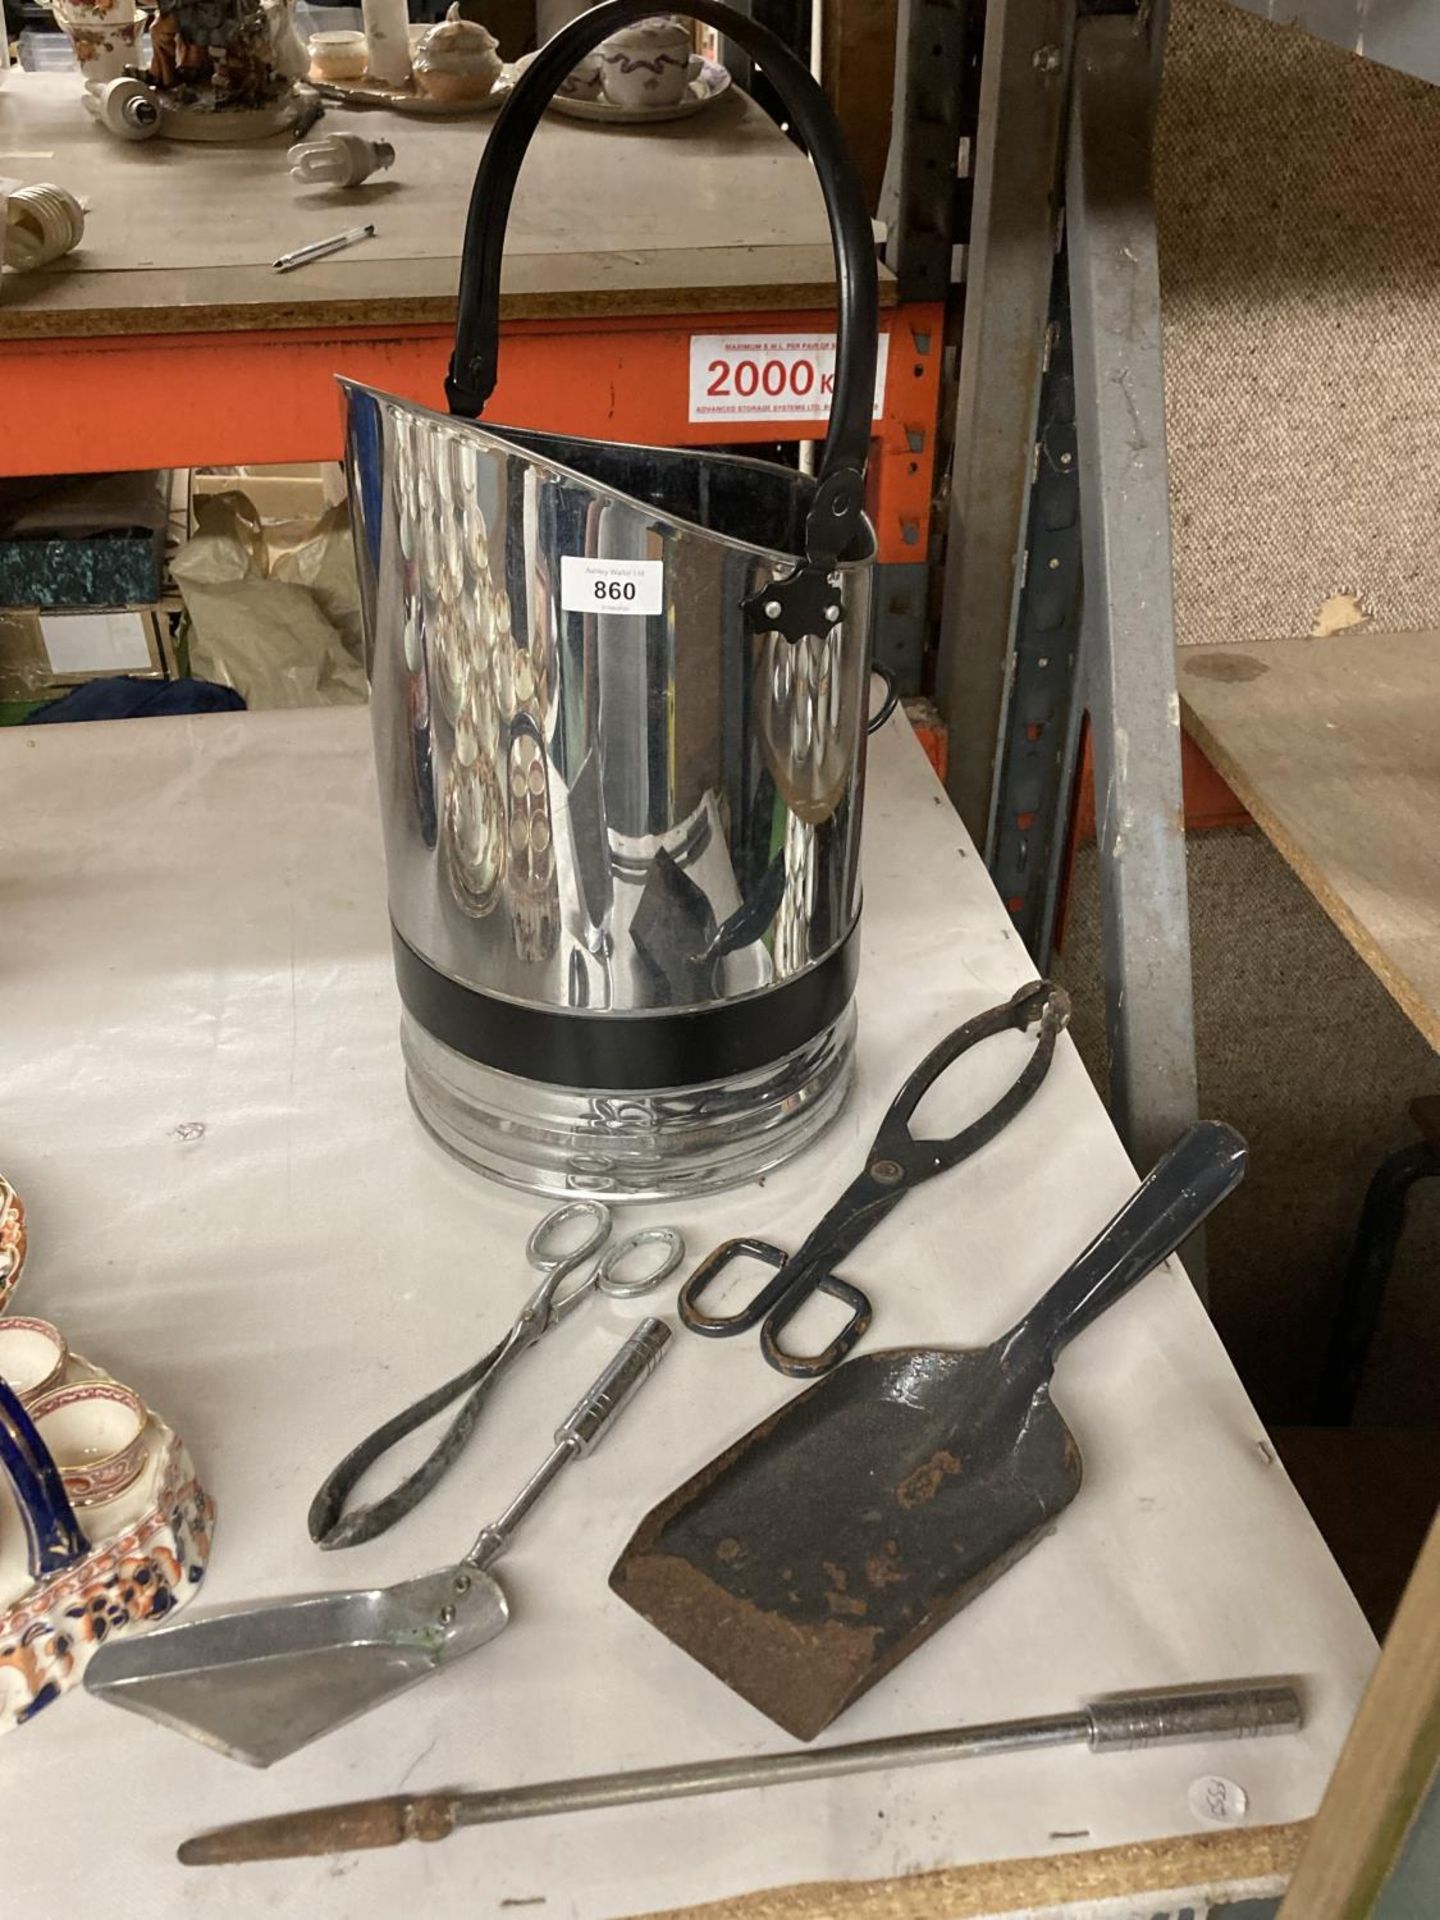 A STAINLESS STEEL AND BLACK COAL SCUTTLE, POKER, TONGS, SHOVEL, ETC